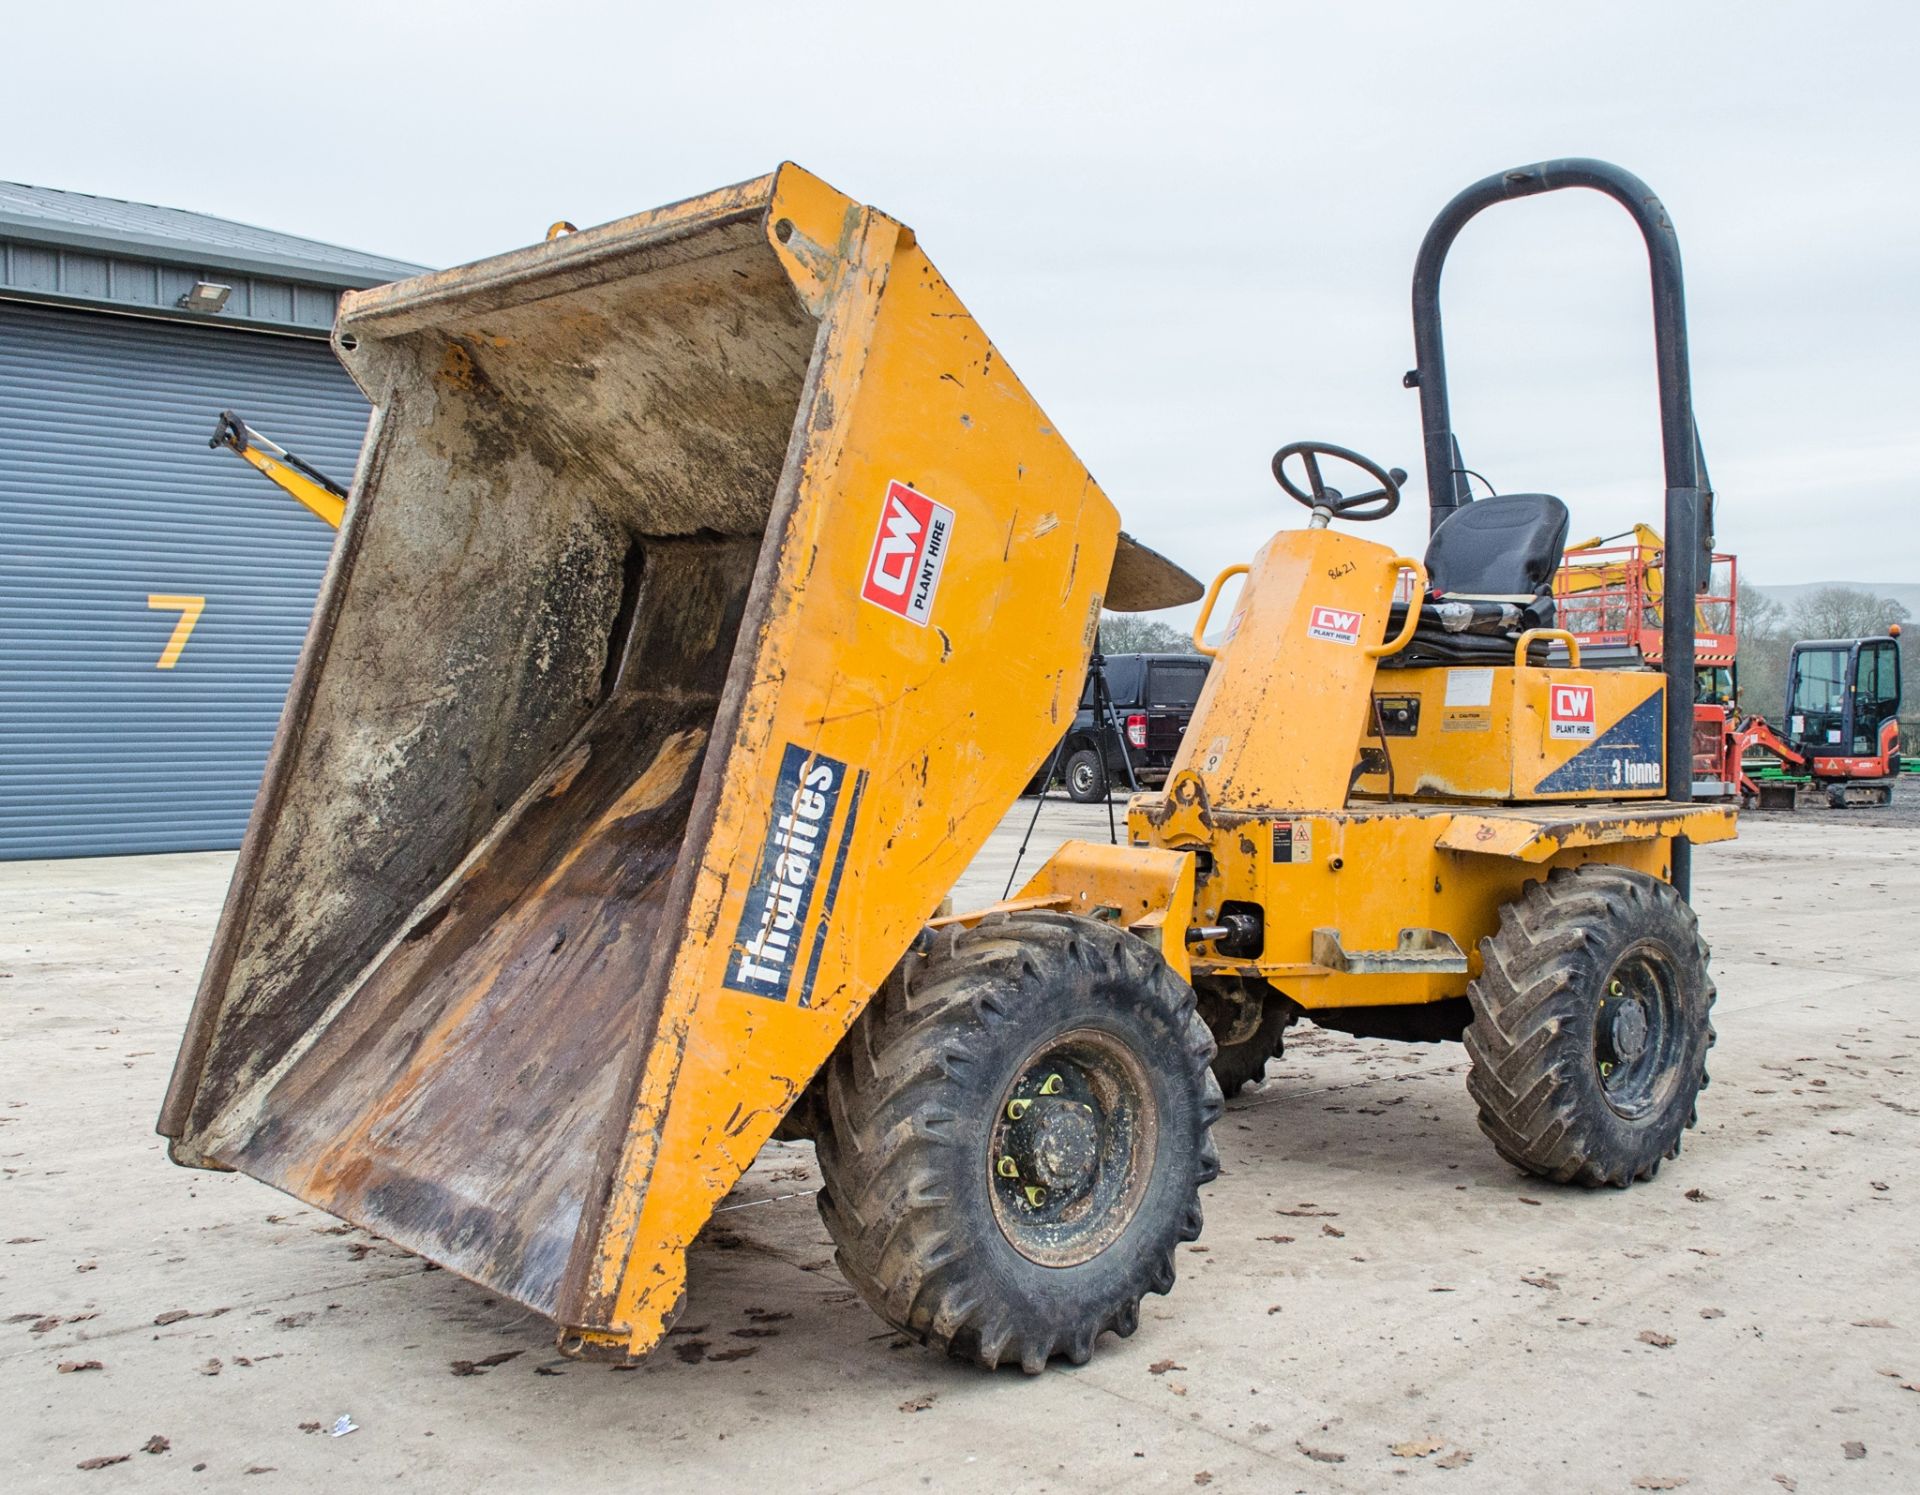 Thwaites 3 tonne straight skip dumper Year: 2016 S/N: 1610D3798 Recorded Hours: Not displayed (Clock - Image 9 of 23